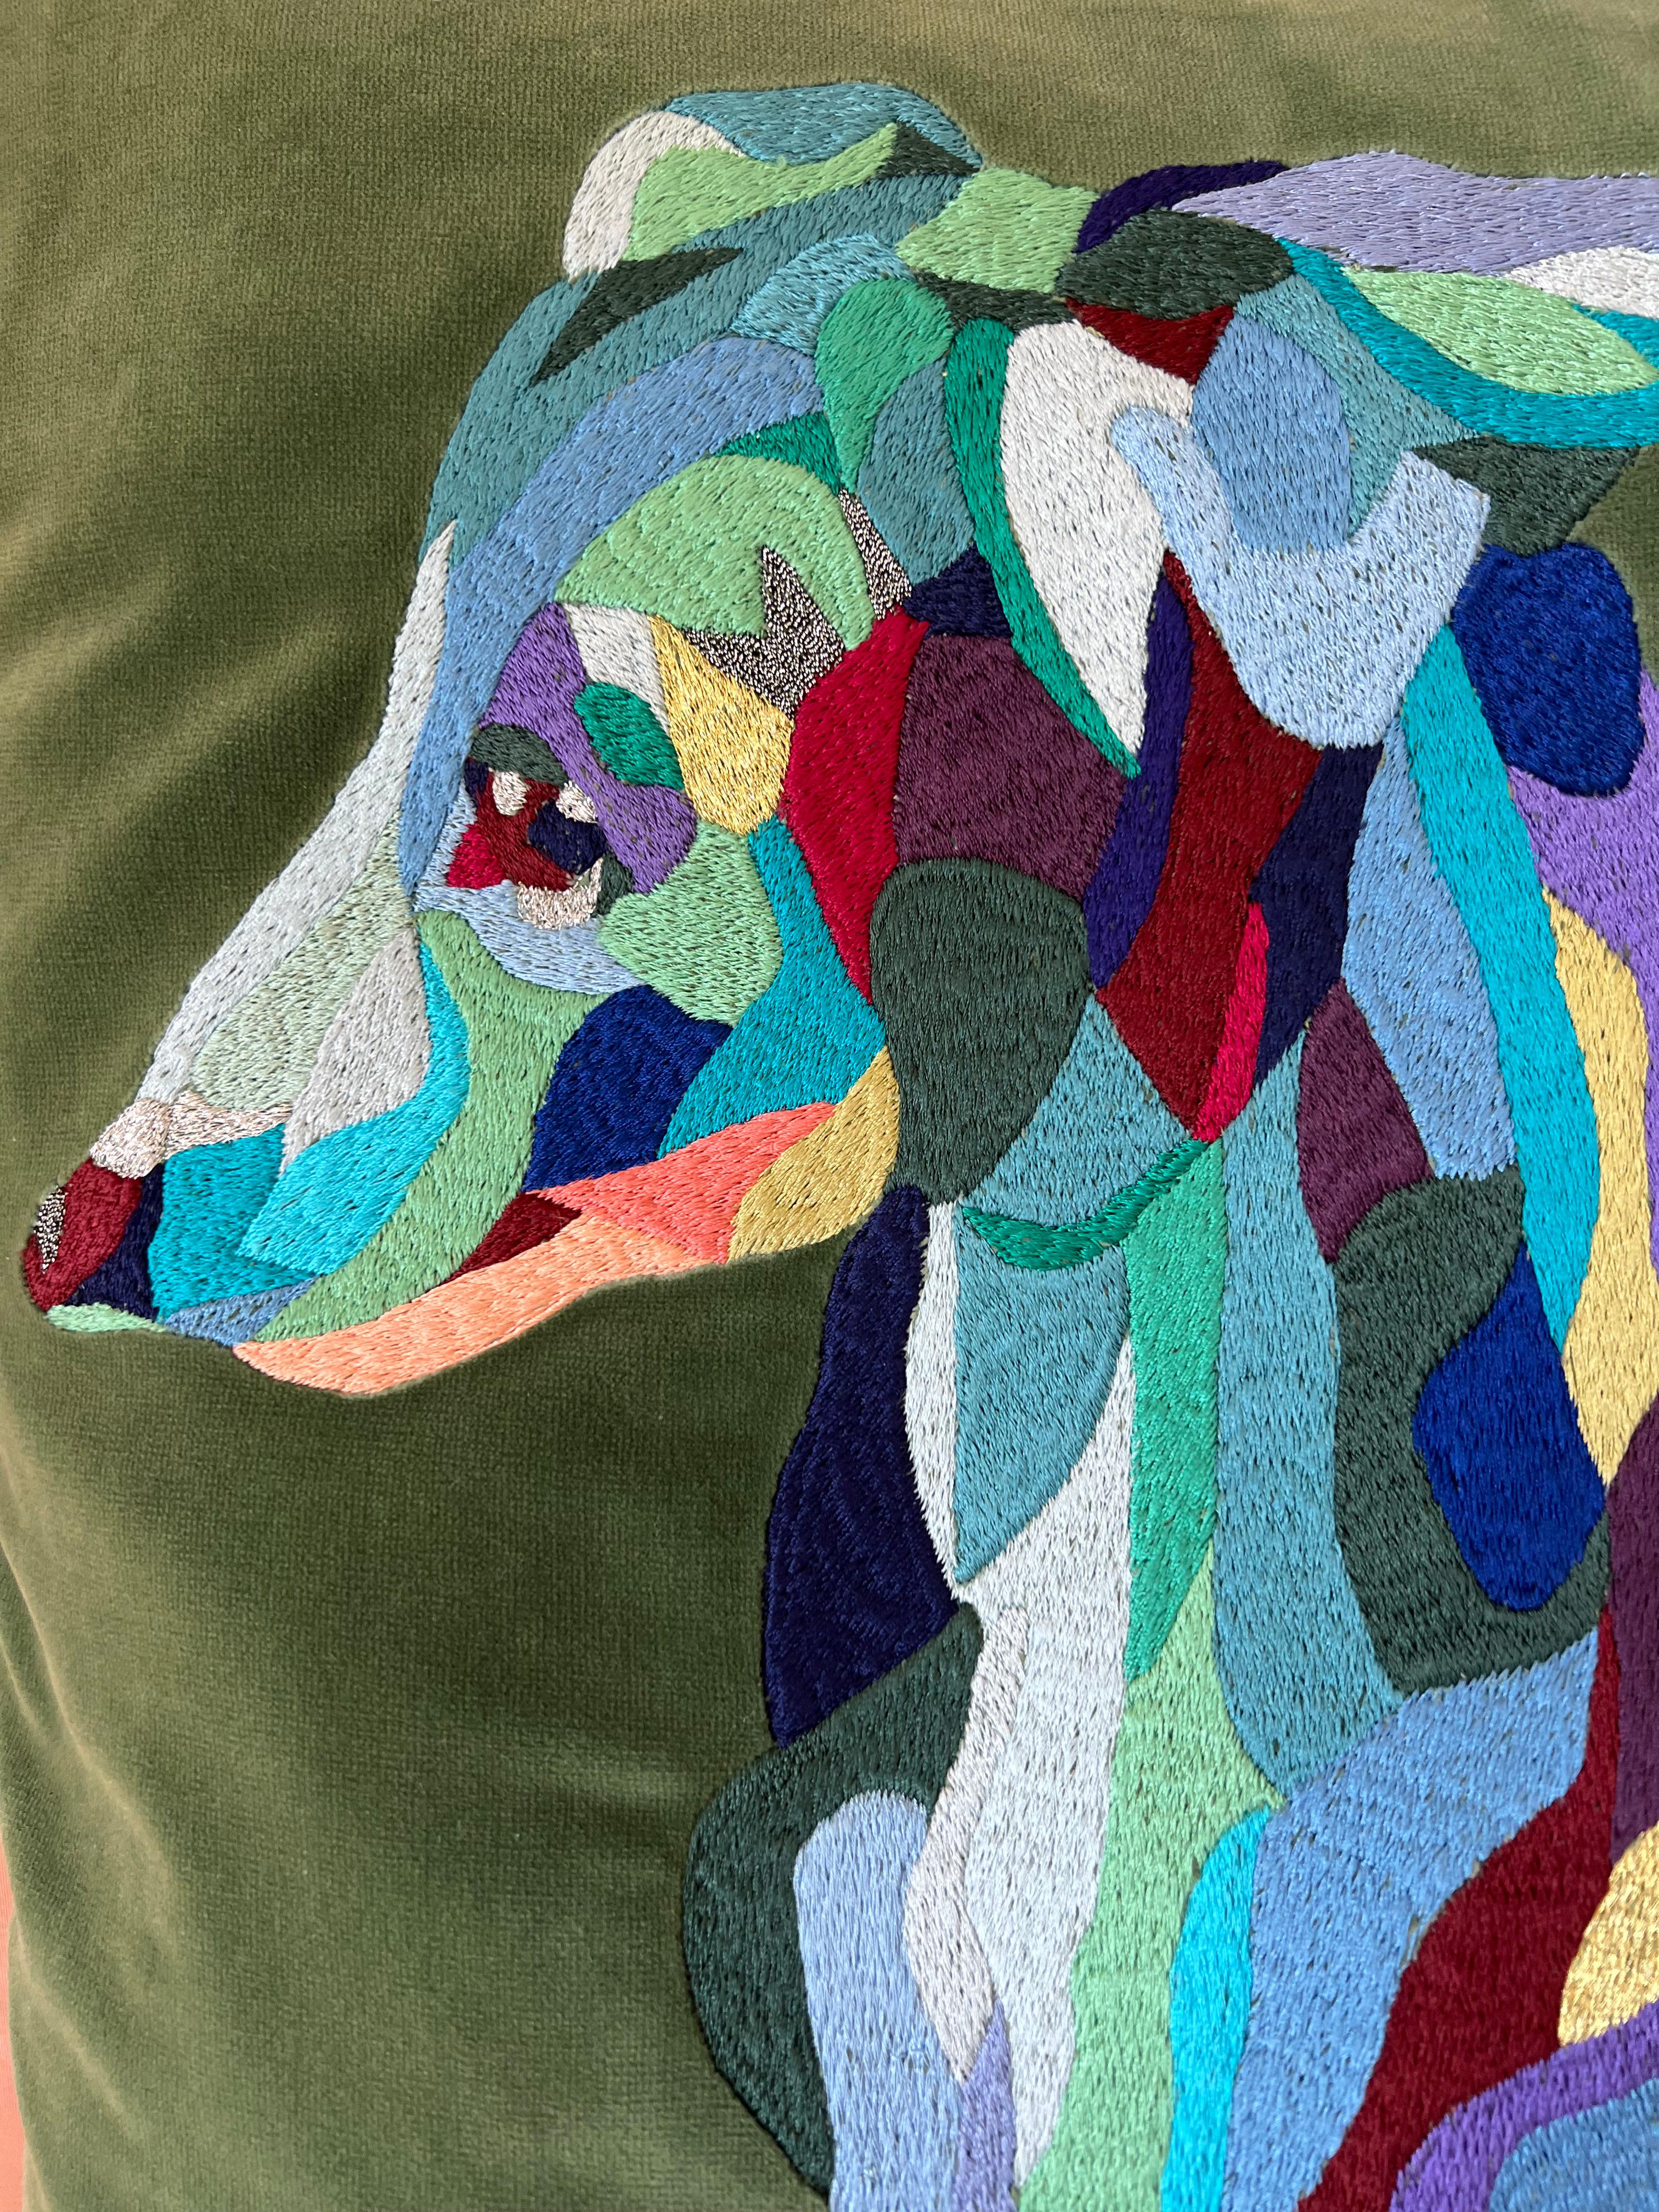 The Italian Greyhound dog, one of my favorite feline subjects, is finely embroidered with colorful silk threads: rich blue tones are assembled into a dynamic and edgy portrait on sage colored velvet fabric. Tonal twisted piping and tassels embellish